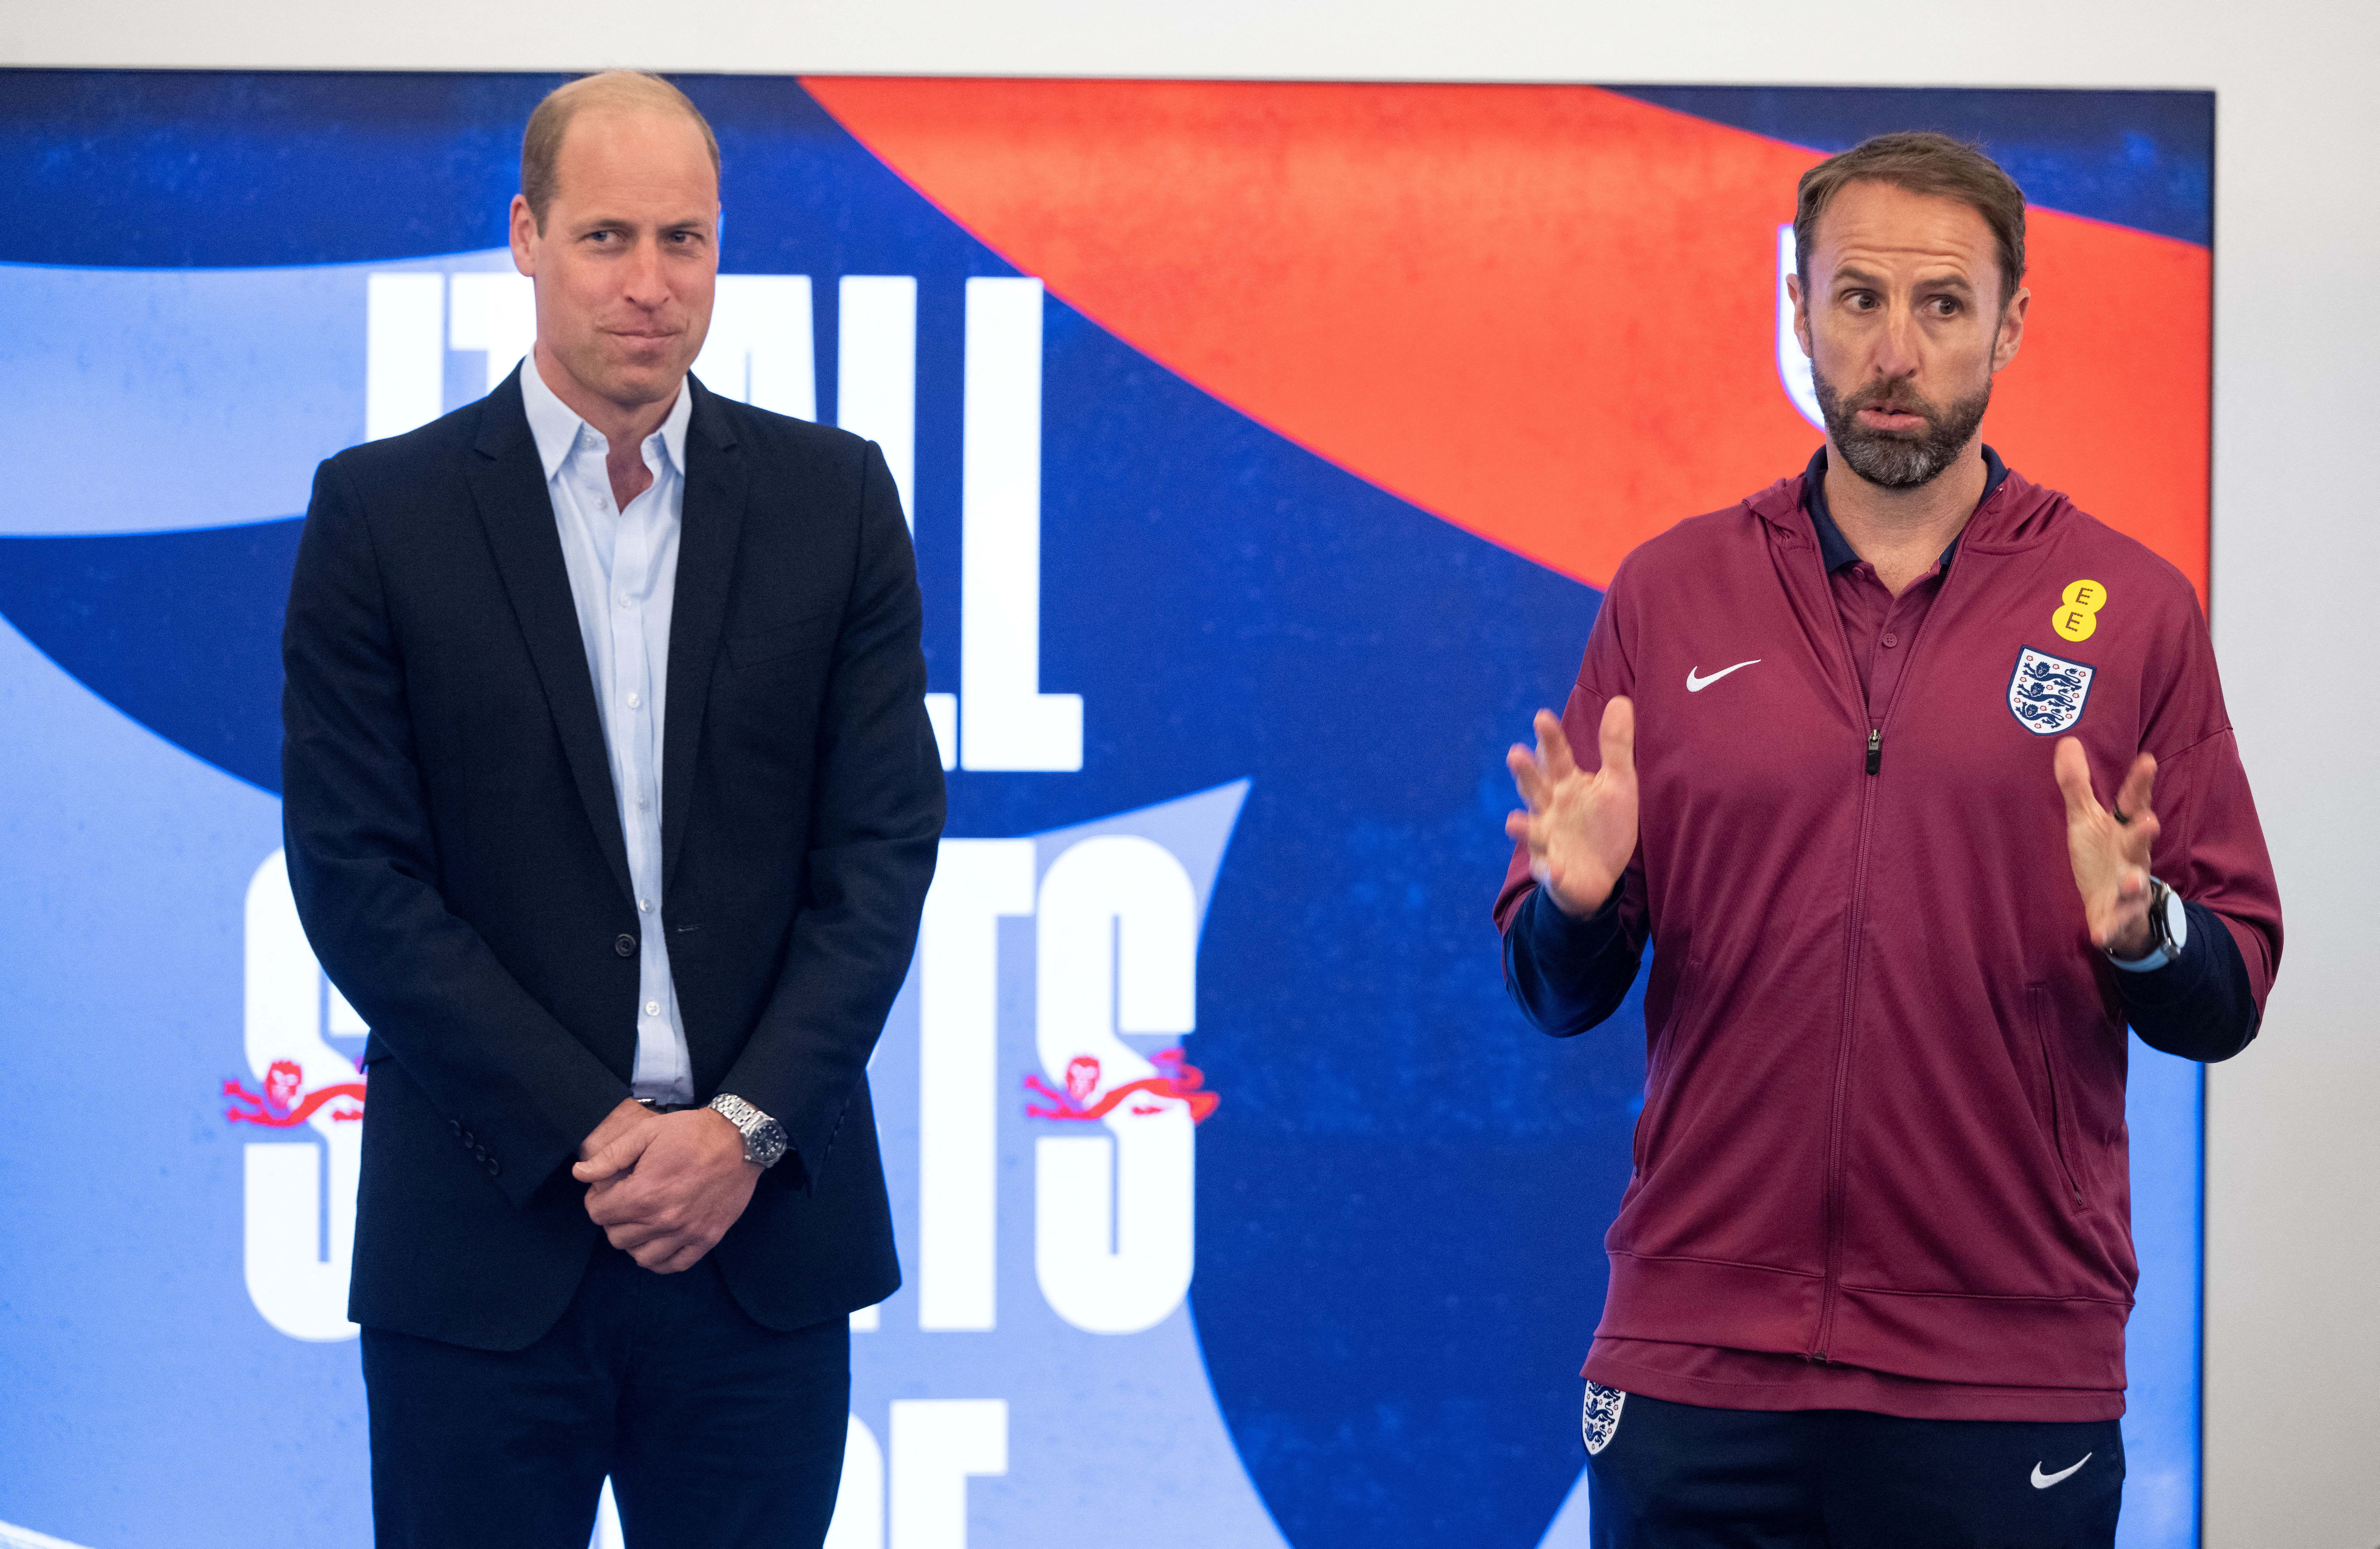 Prince William's visit to the England squad